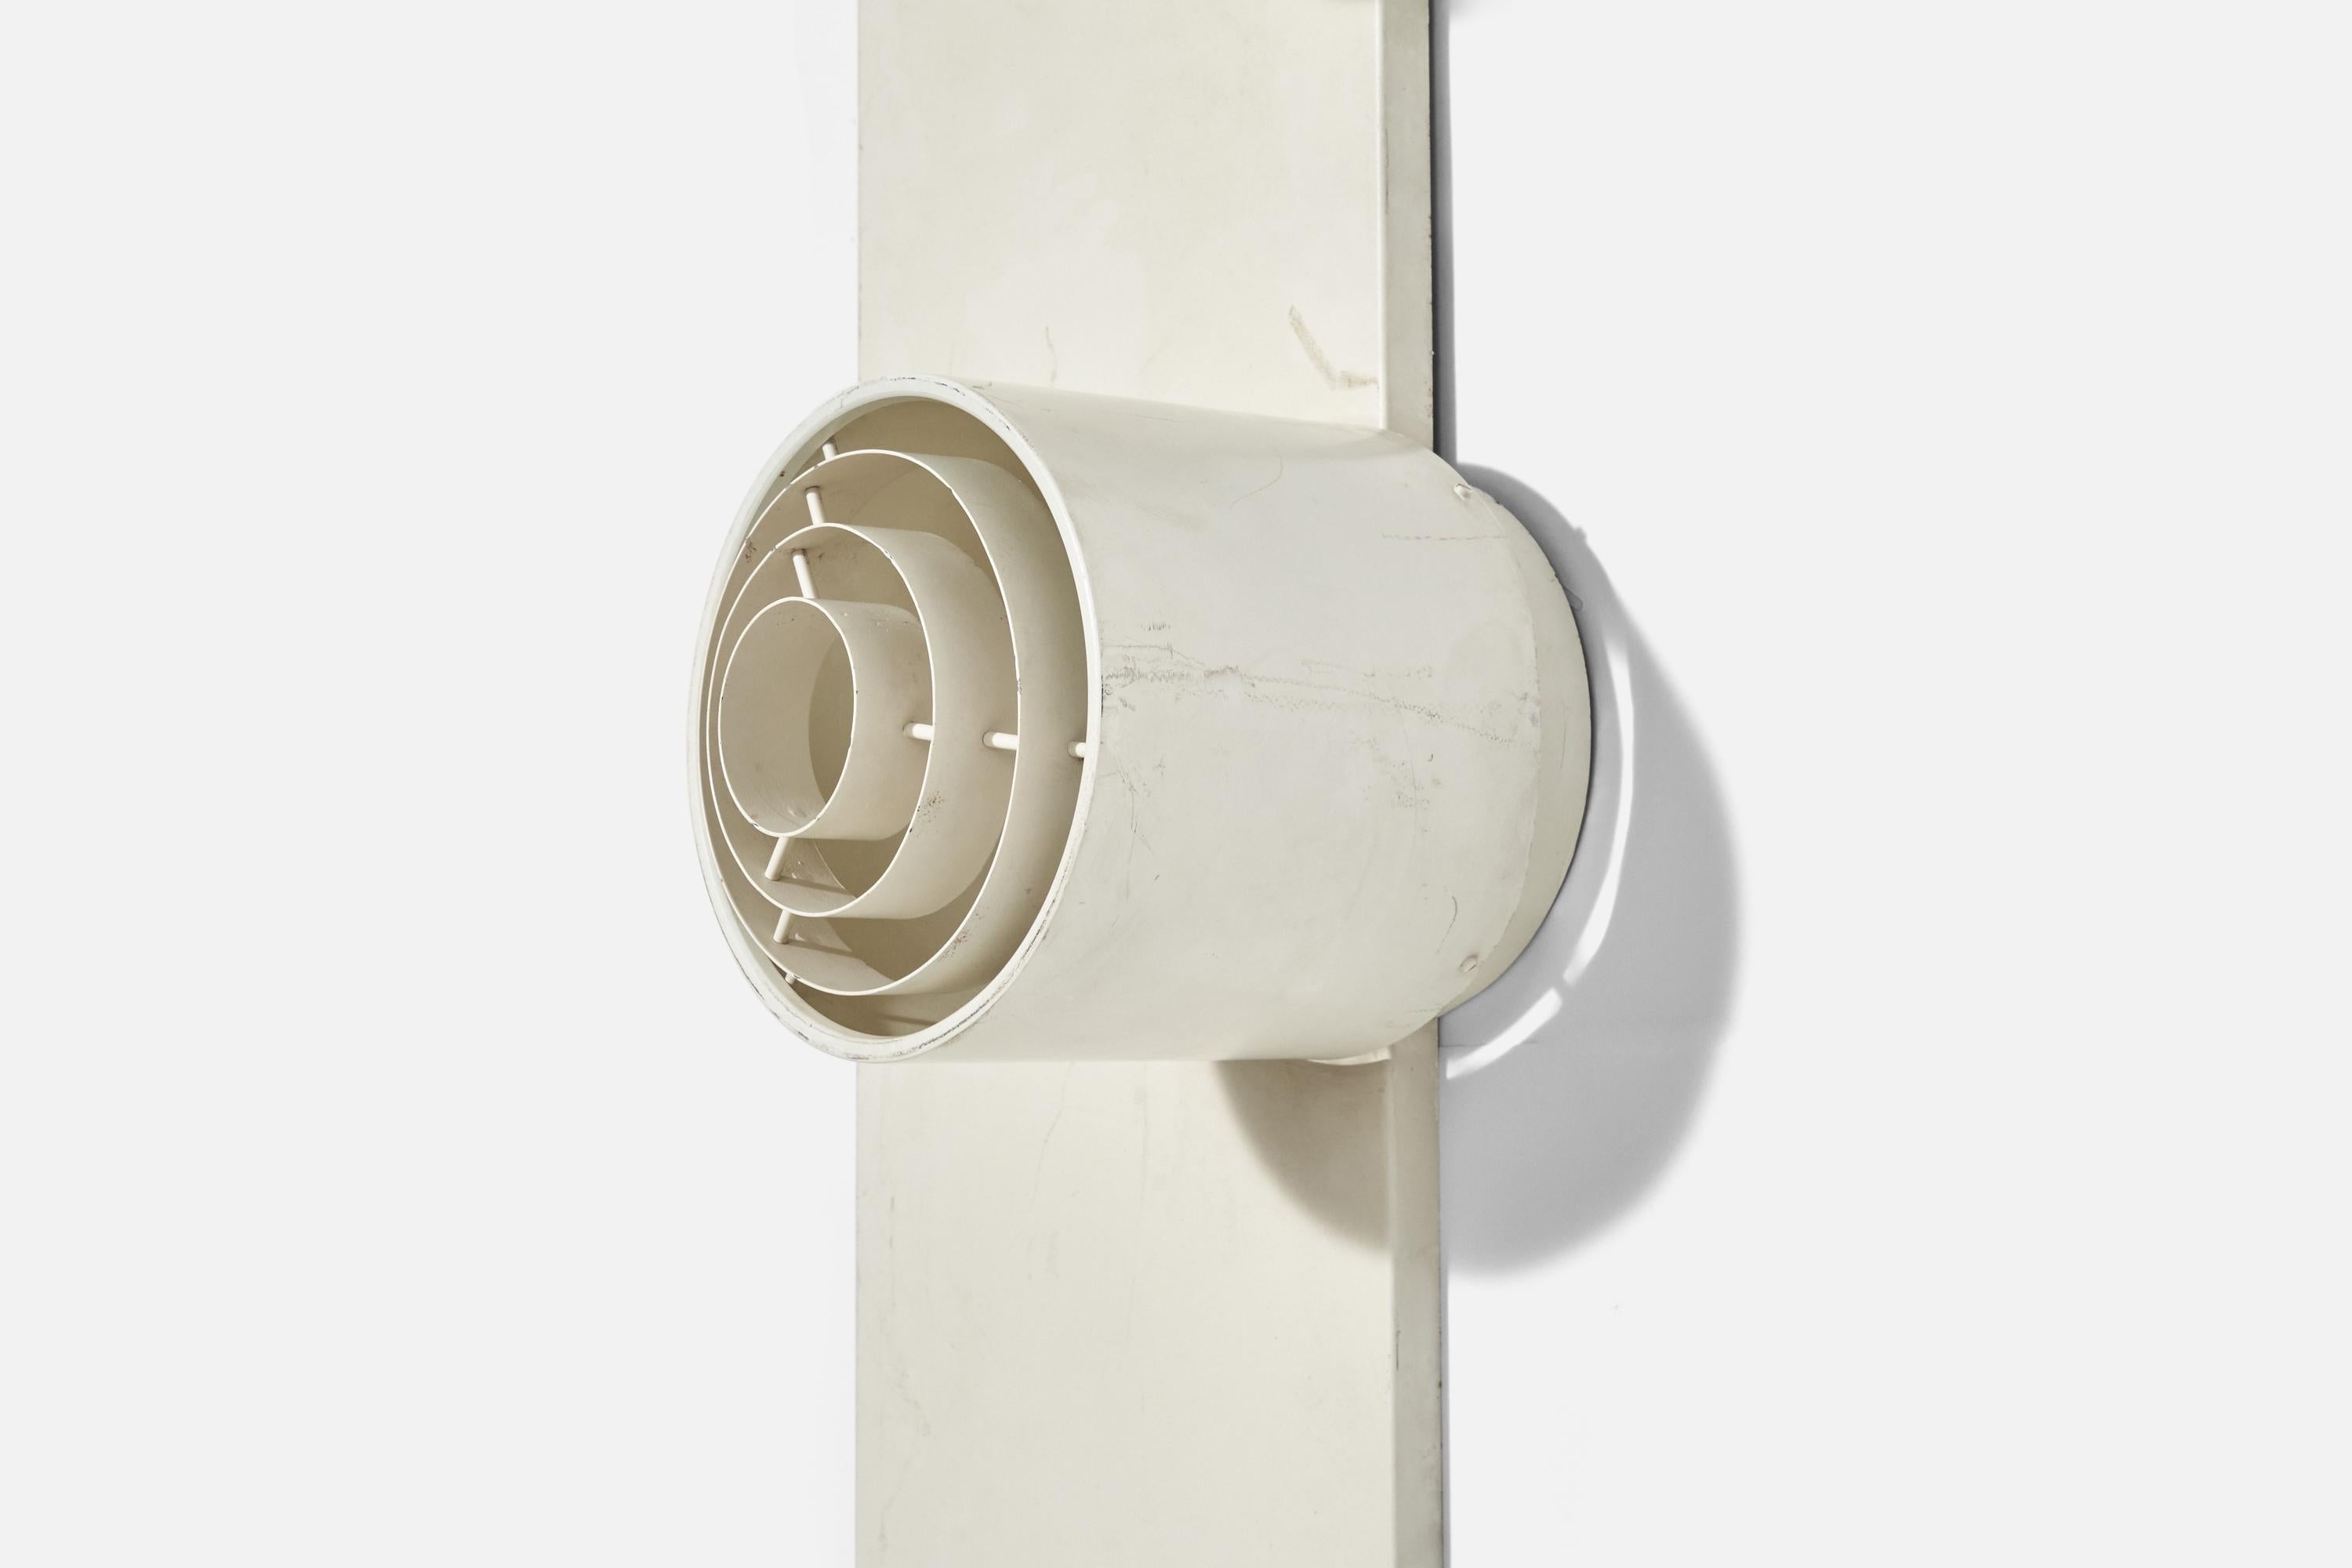 Finnish  Alvar Aalto, Sconce or Flush Mount, Lacquered Metal, Idman, Finland, 1950s For Sale